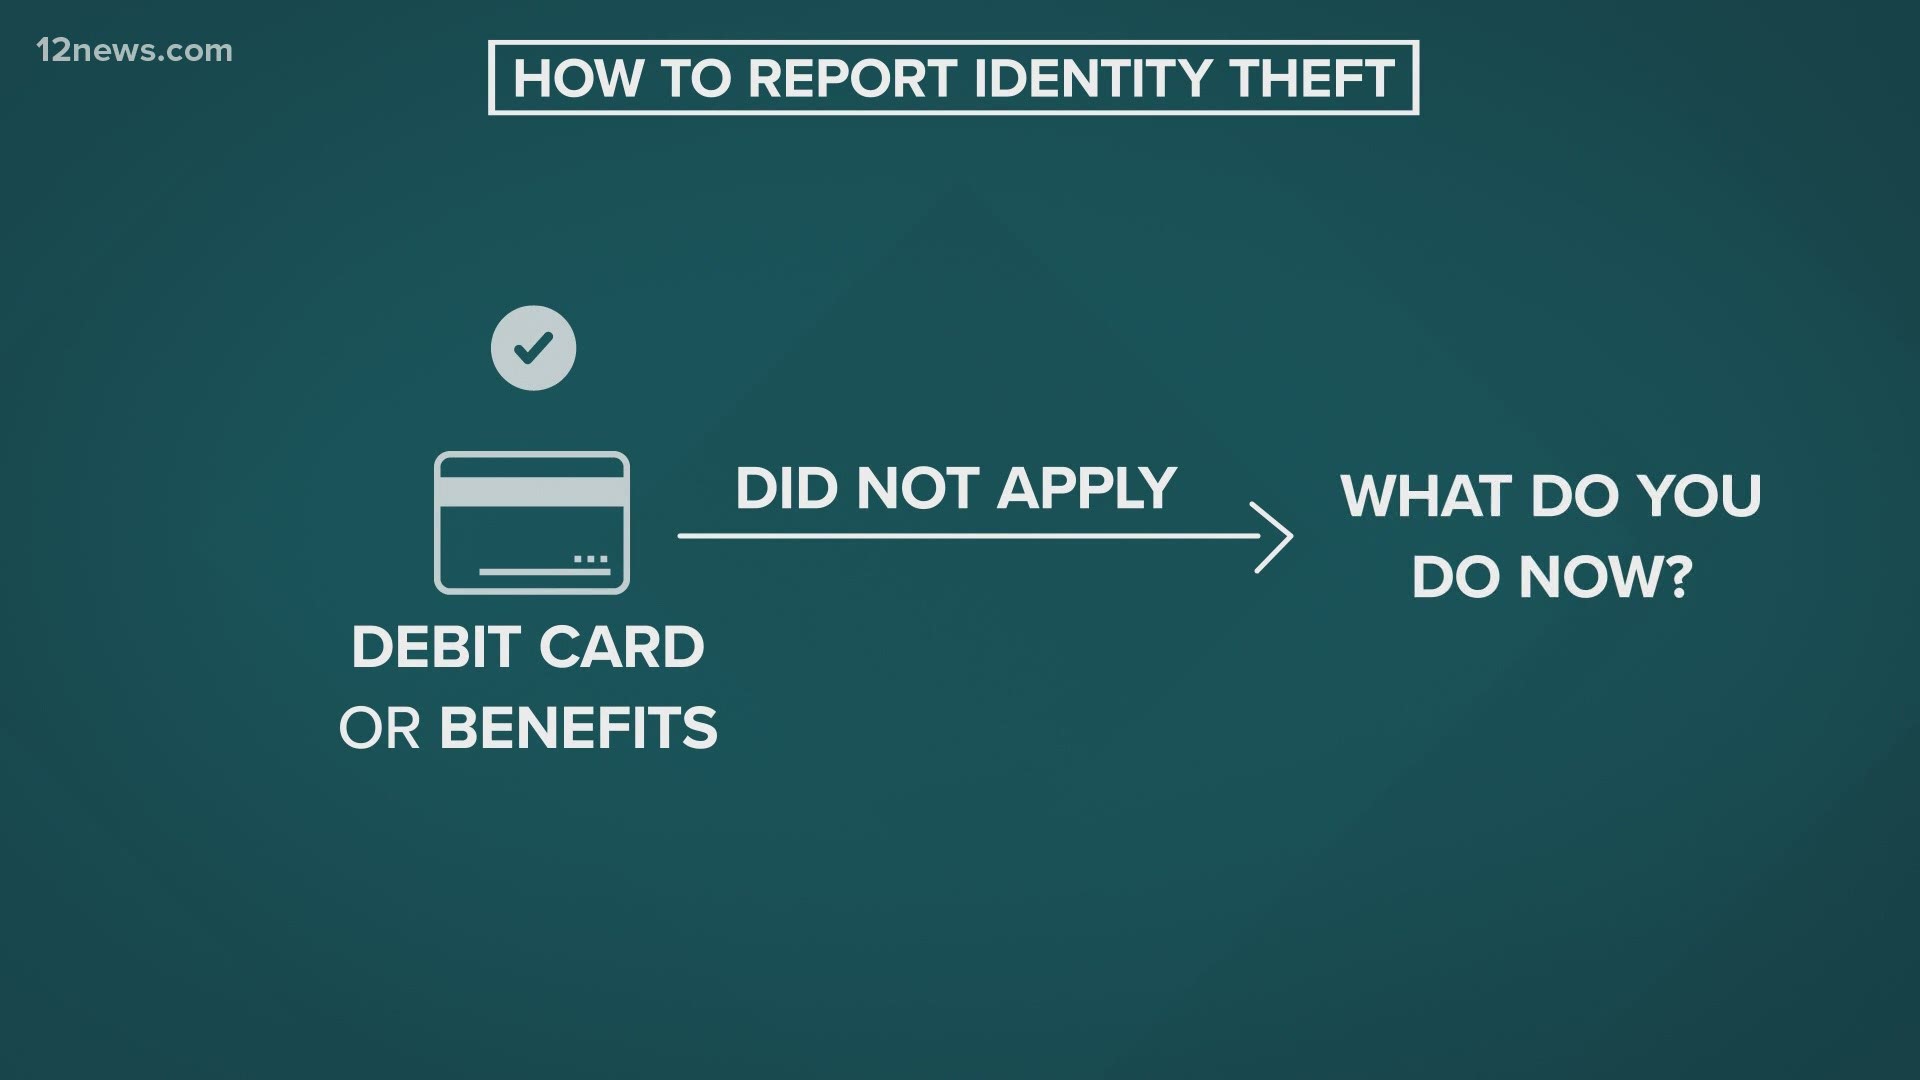 As Arizonans have sought unemployment benefits during the pandemic, scammers have found ways to take advantage. Here's what you should do if your identity was stolen